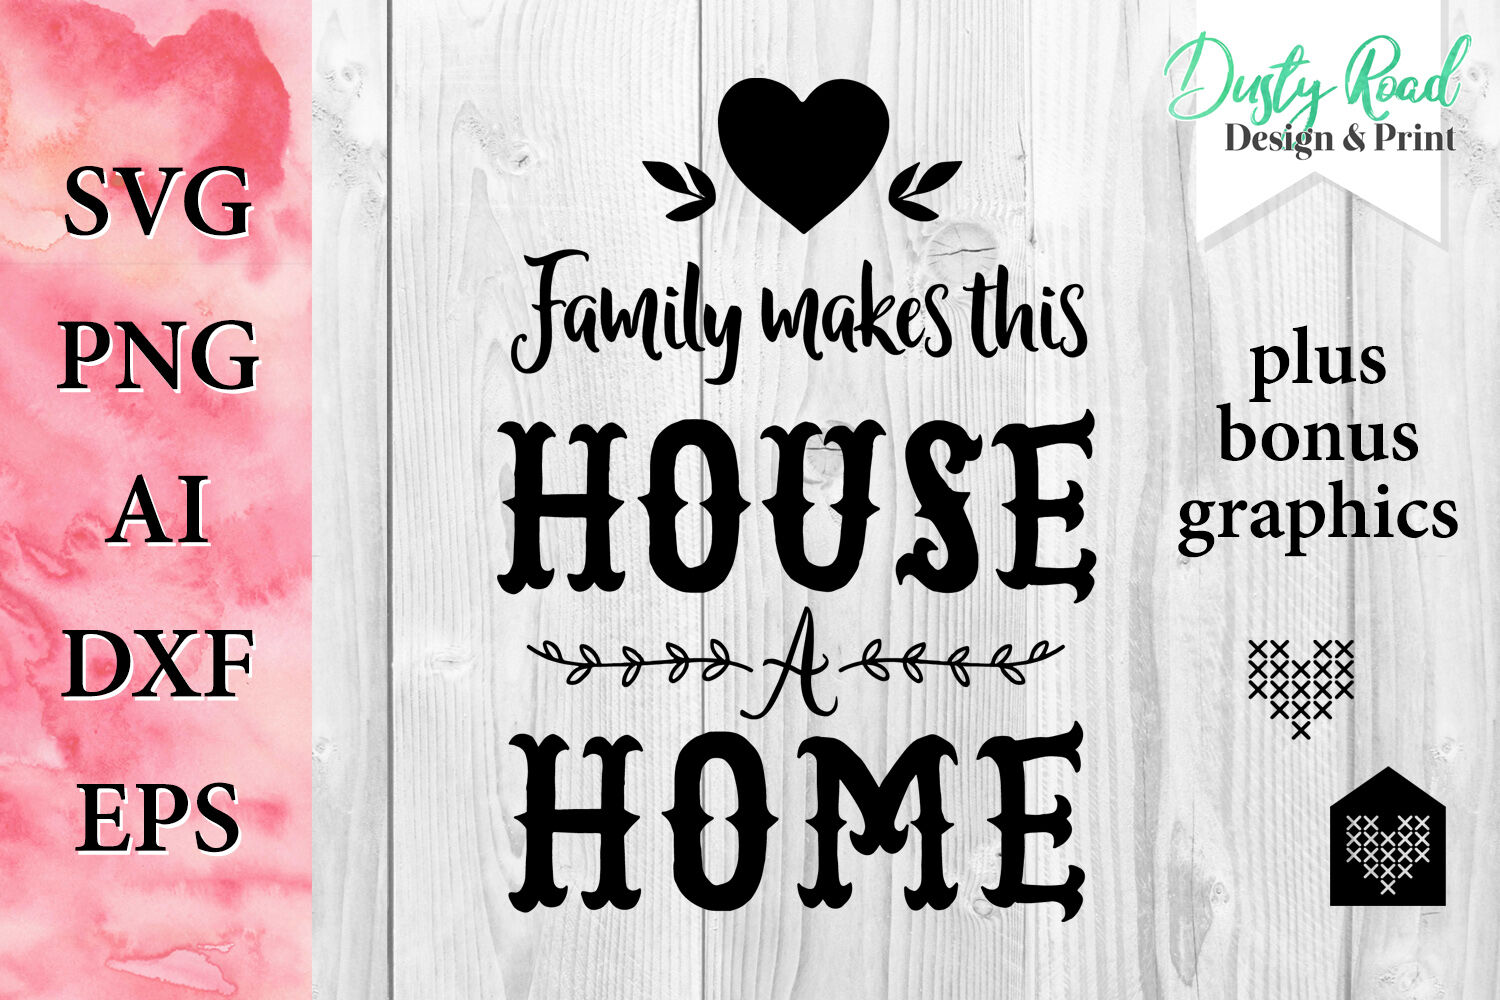 SVG & PNG - Family makes this House a home By DustyRoadDesign